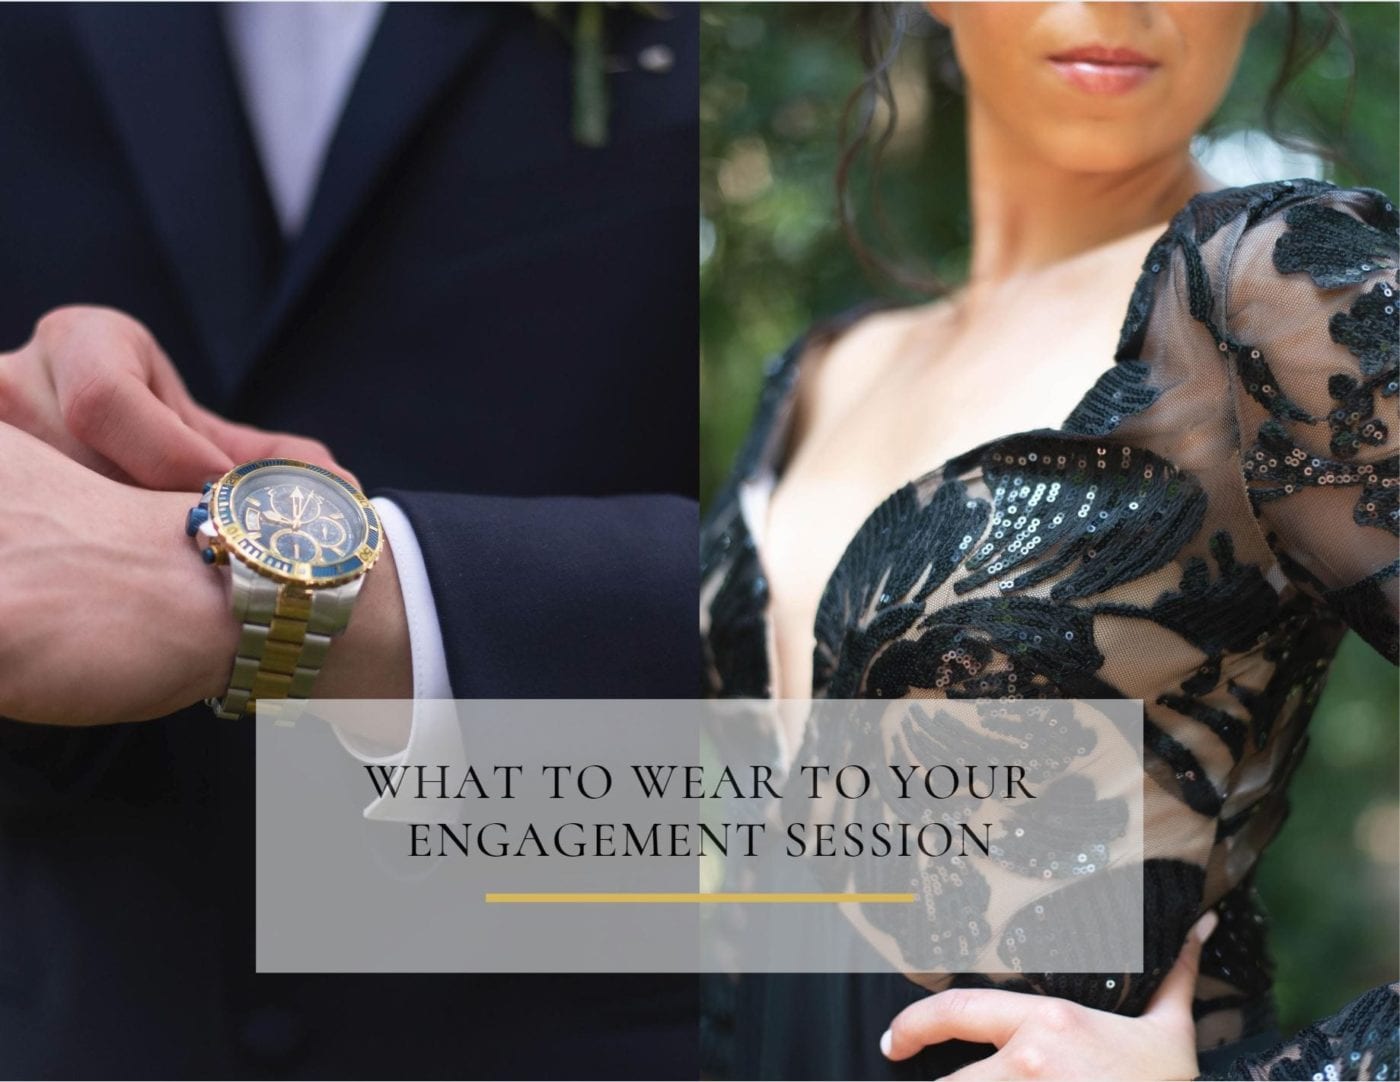 What to wear to your tampa engagement photos - bride wearing black lace elegant dress and groom wearing navy tuxedo showing off watch